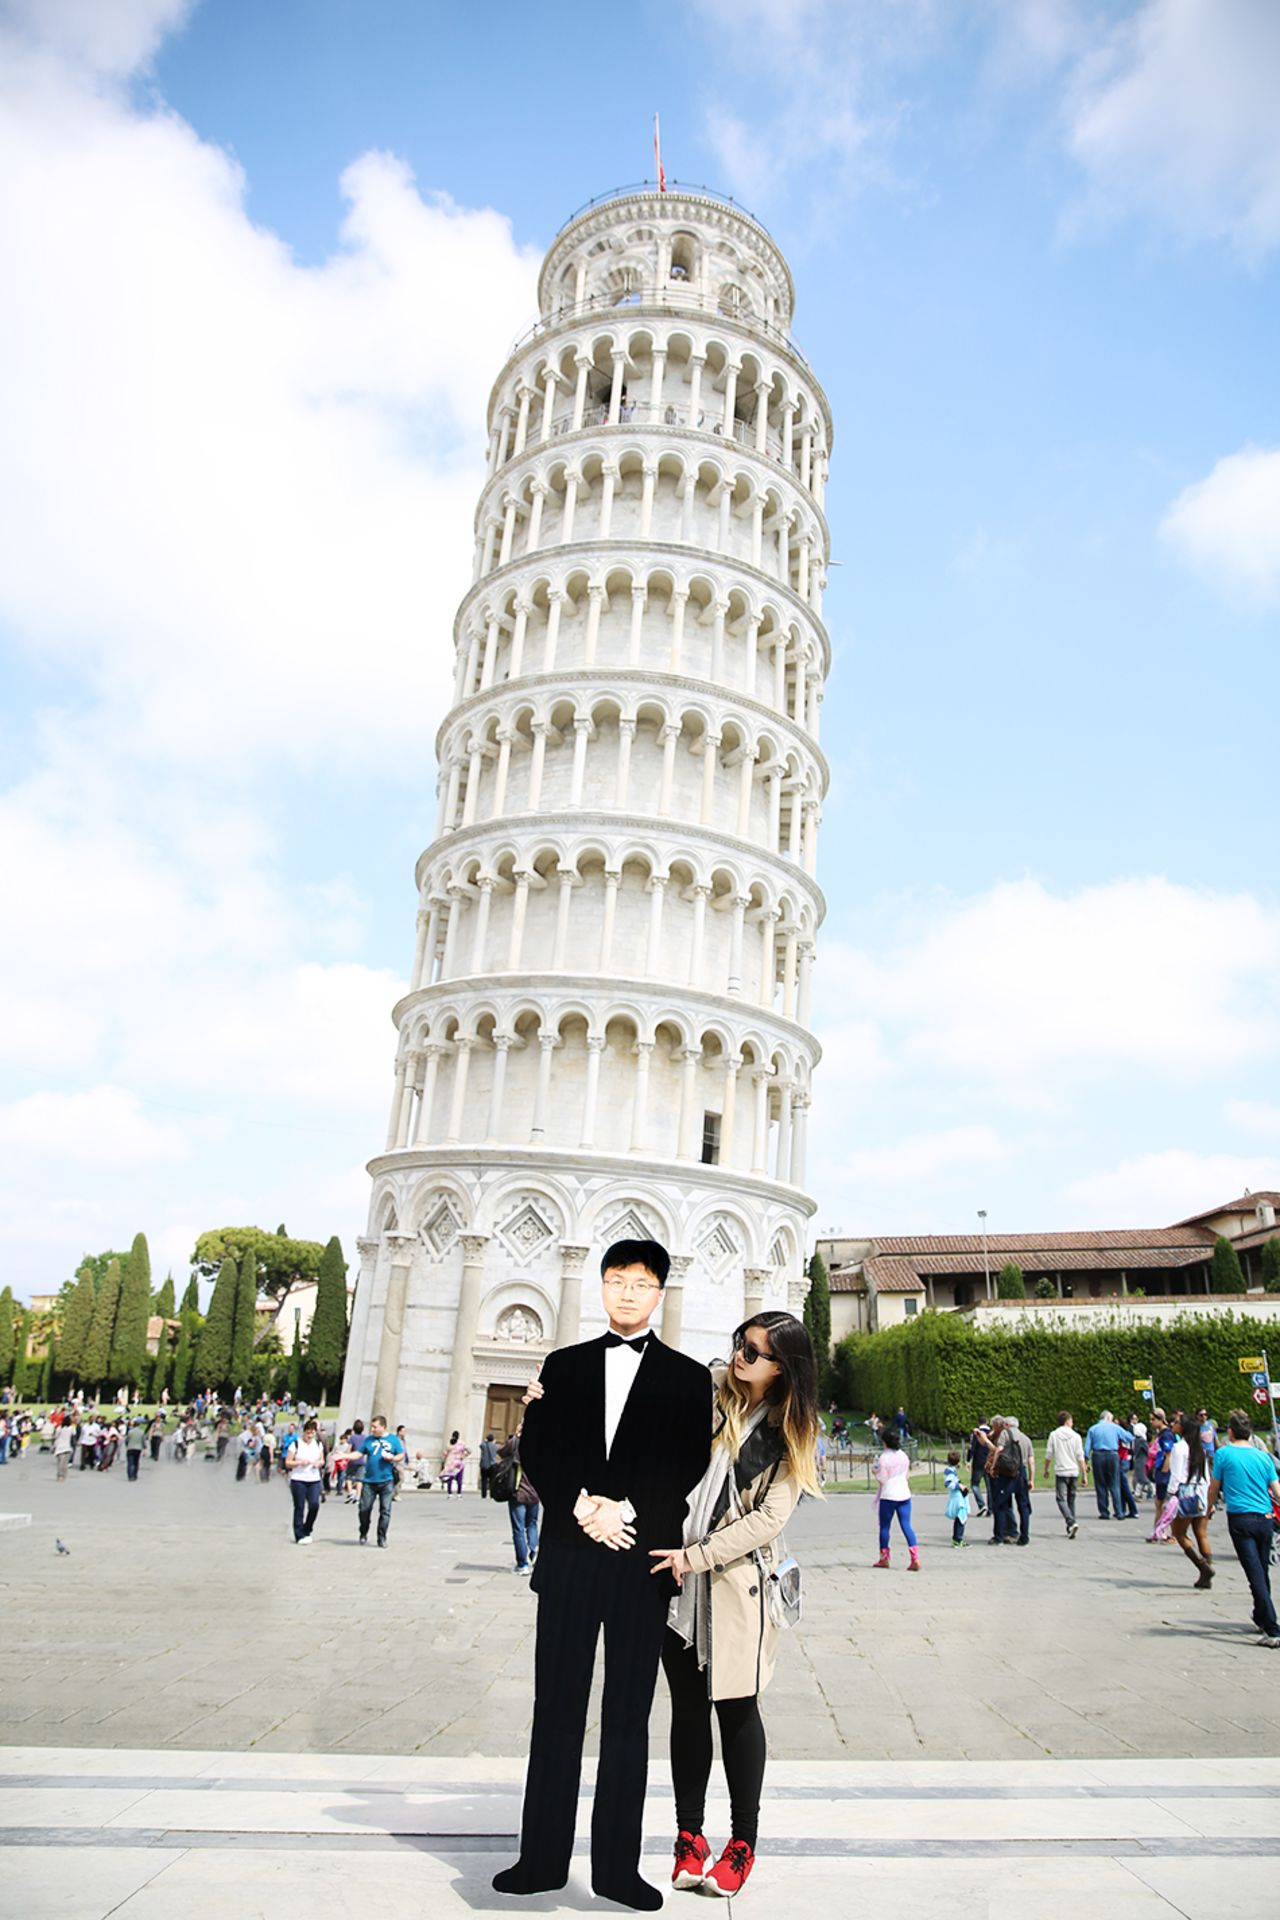 Yang says her father was a PGA-certified pro golfer, but couldn't go on tour because he had to raise her and her brother. The Leaning Tower of Pisa made a backdrop for one the duo's memorable photos. 